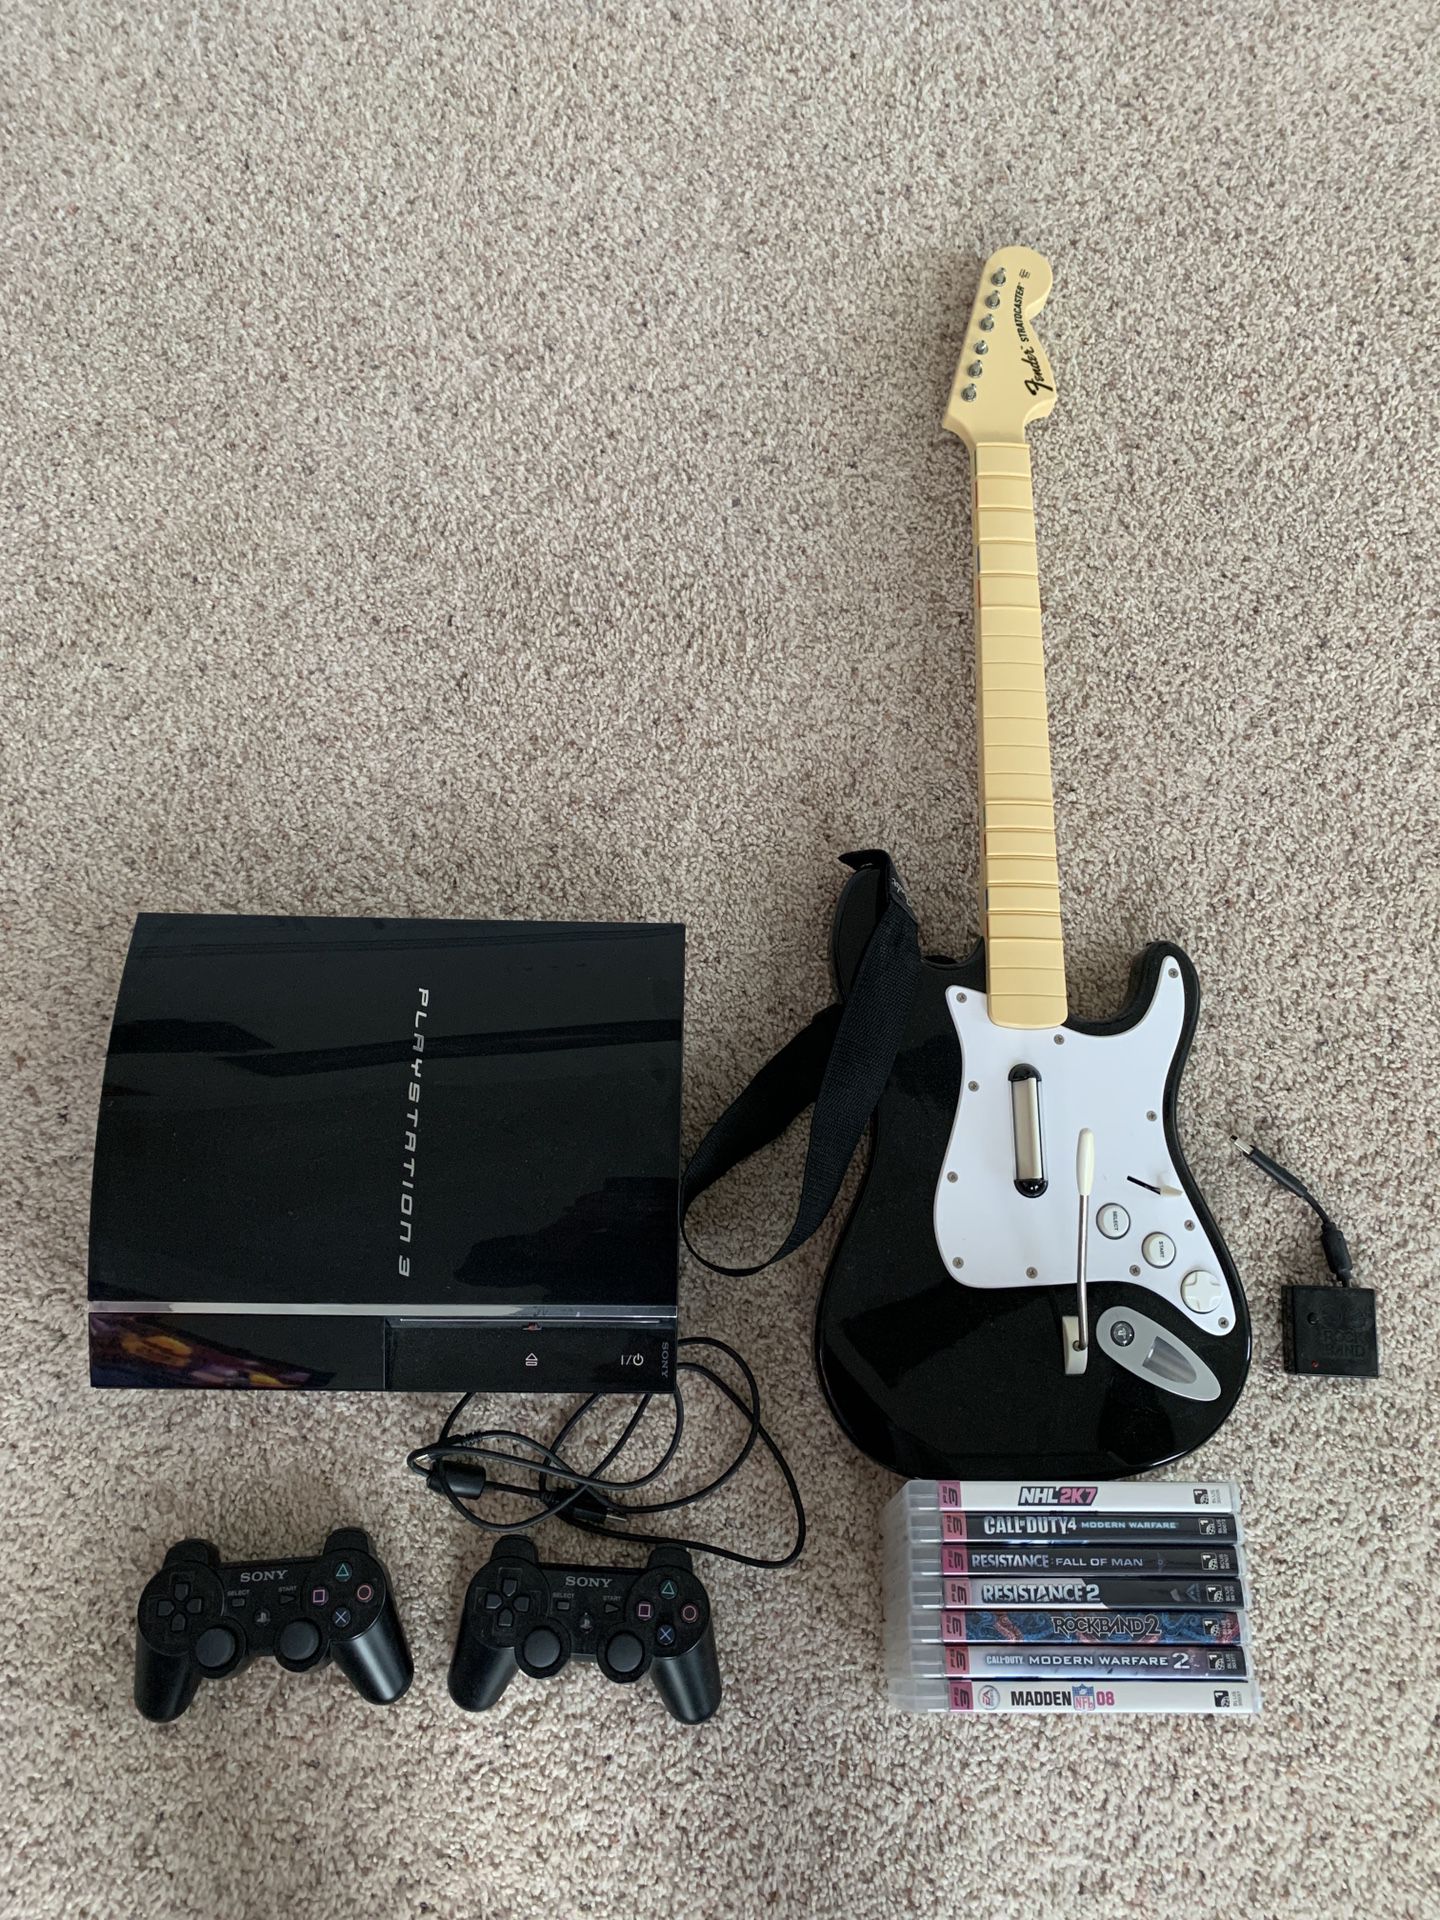 PS3 Console and Games